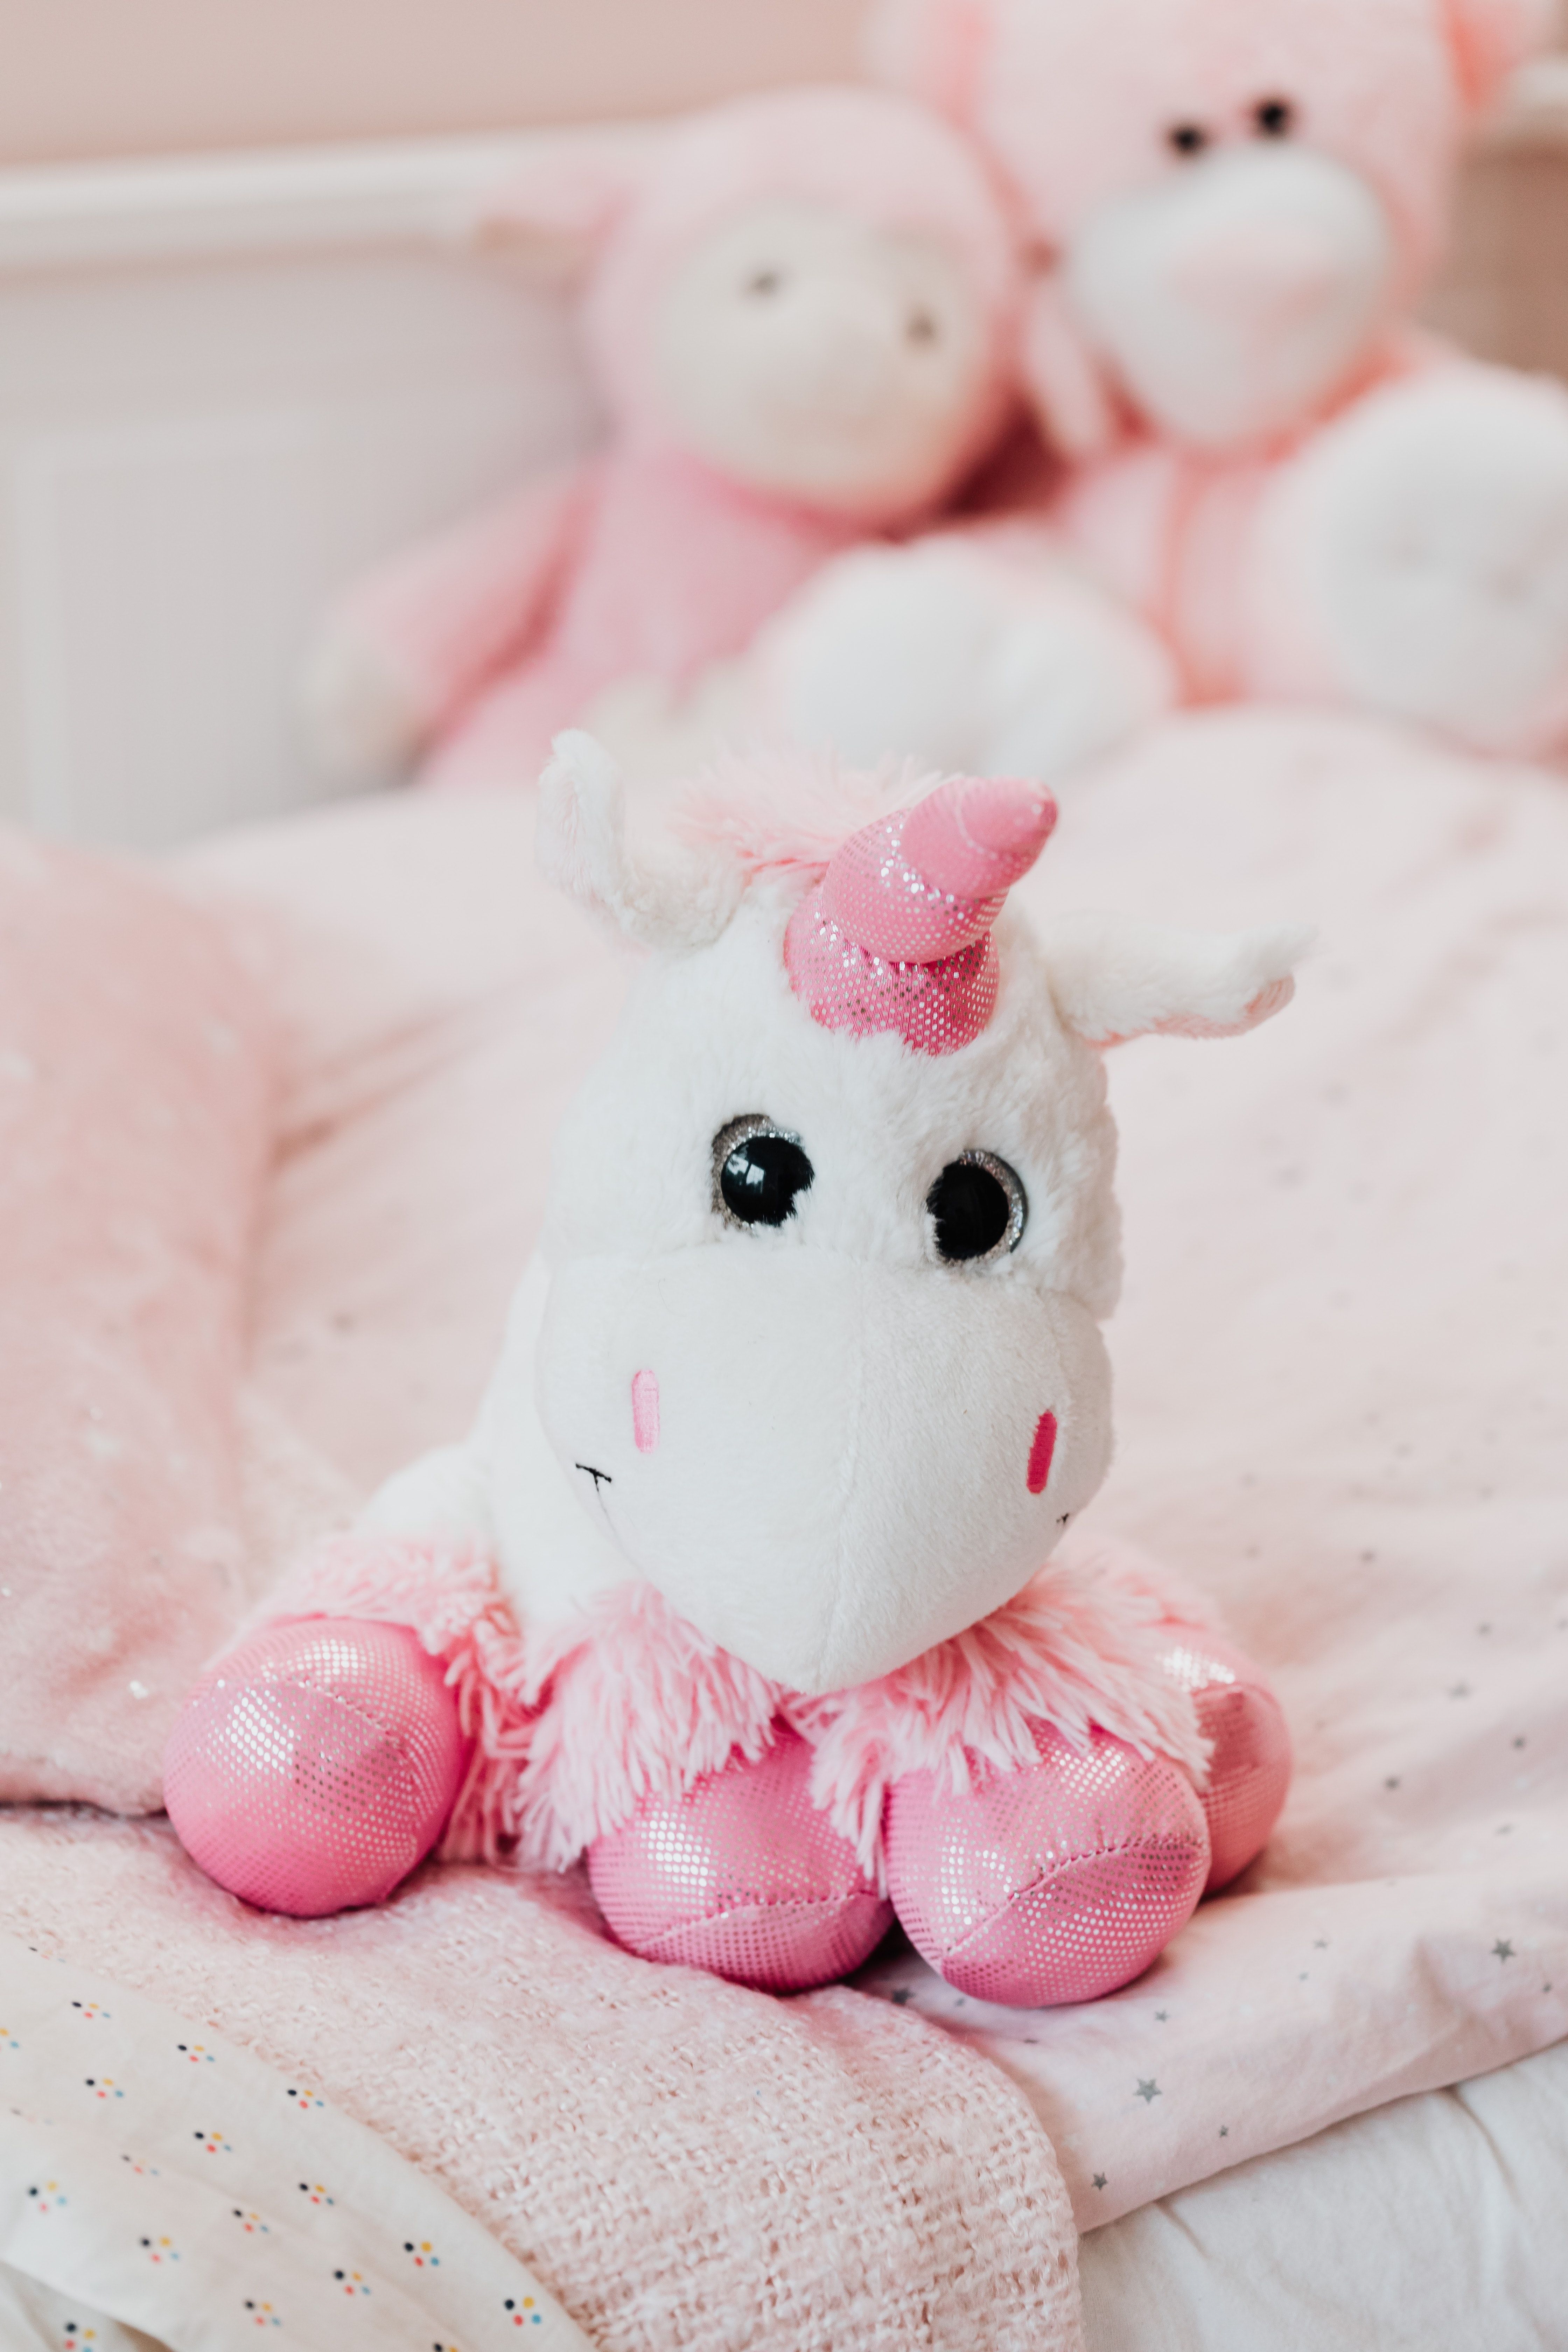 A white stuffed unicorn with a pink horn and tail sits on a bed. - Unicorn